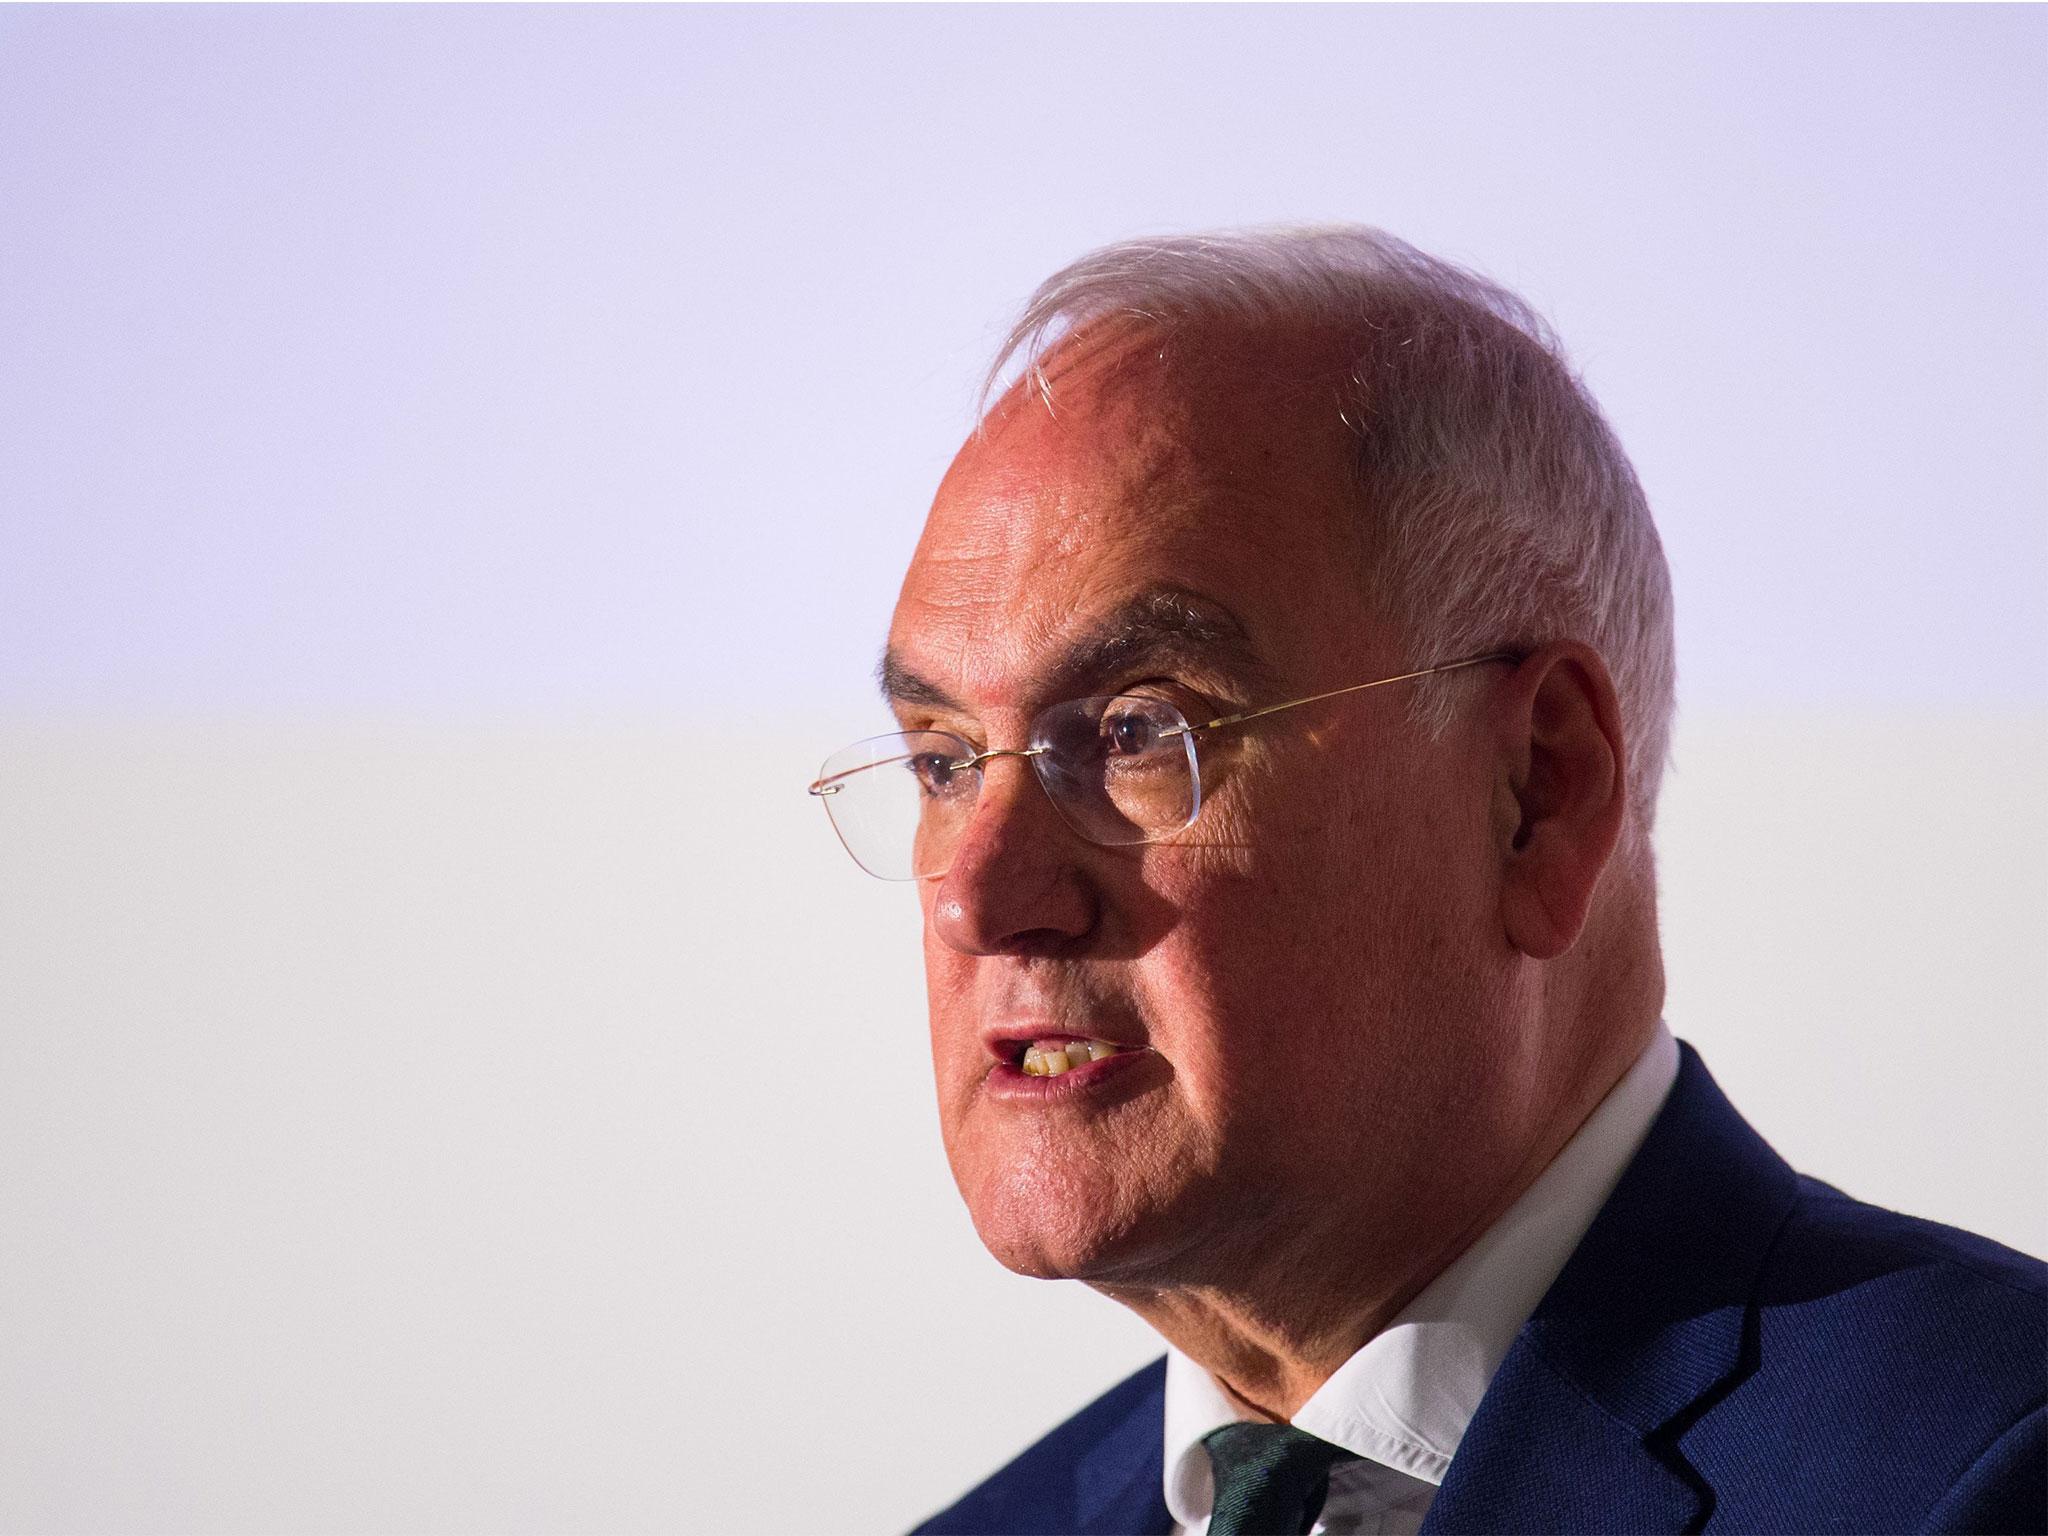 Sir Michael Wilshaw made the comments in an interview on BBC Radio 5 live